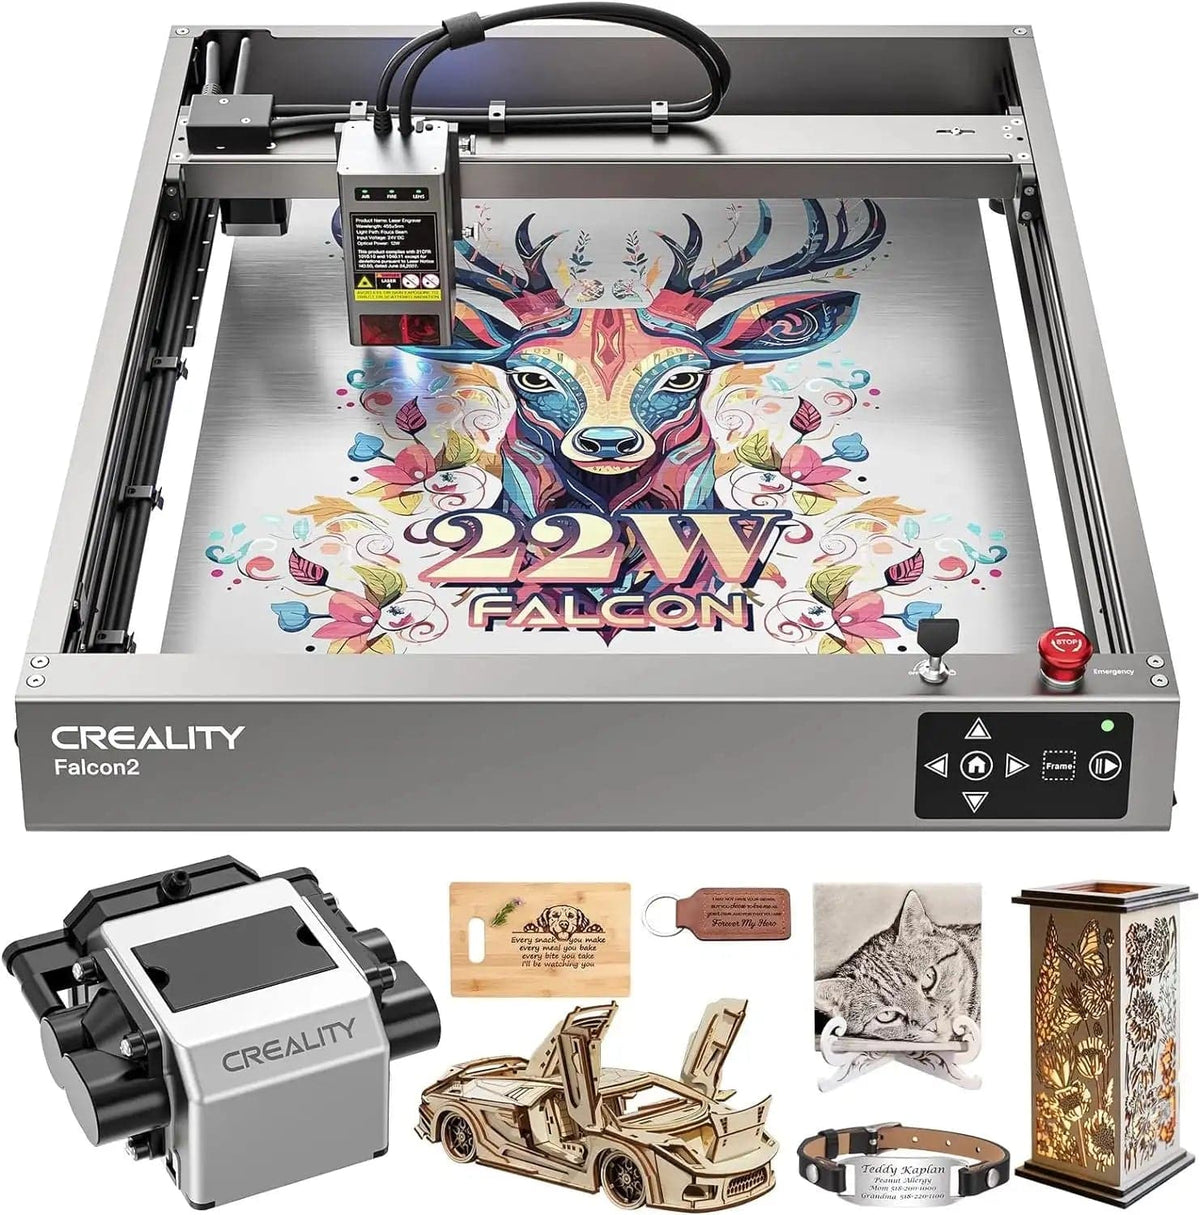 Refurbished Creality Falcon 2 Laser Engraver/Cutter - 'Like New' Condition, 12W/22W Output with Air Assist